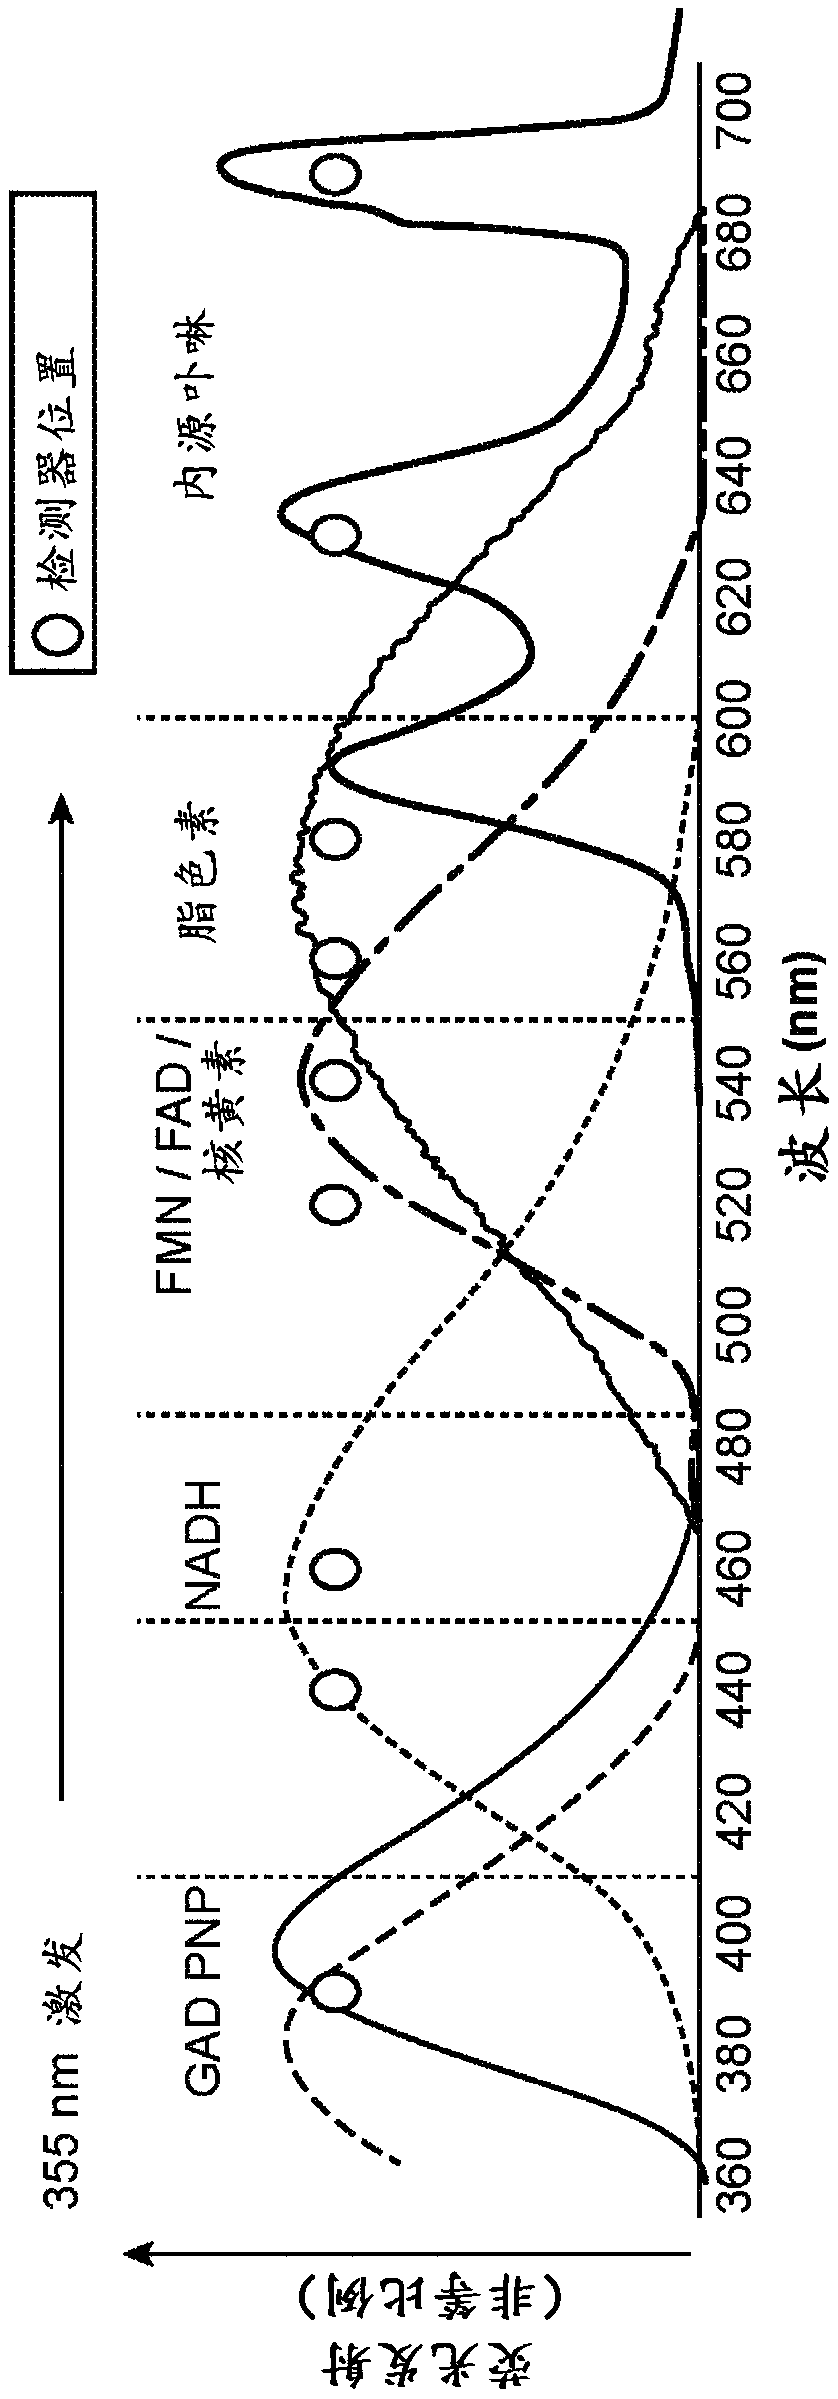 Systems, devices, and methods for time-resolved fluorescent spectroscopy